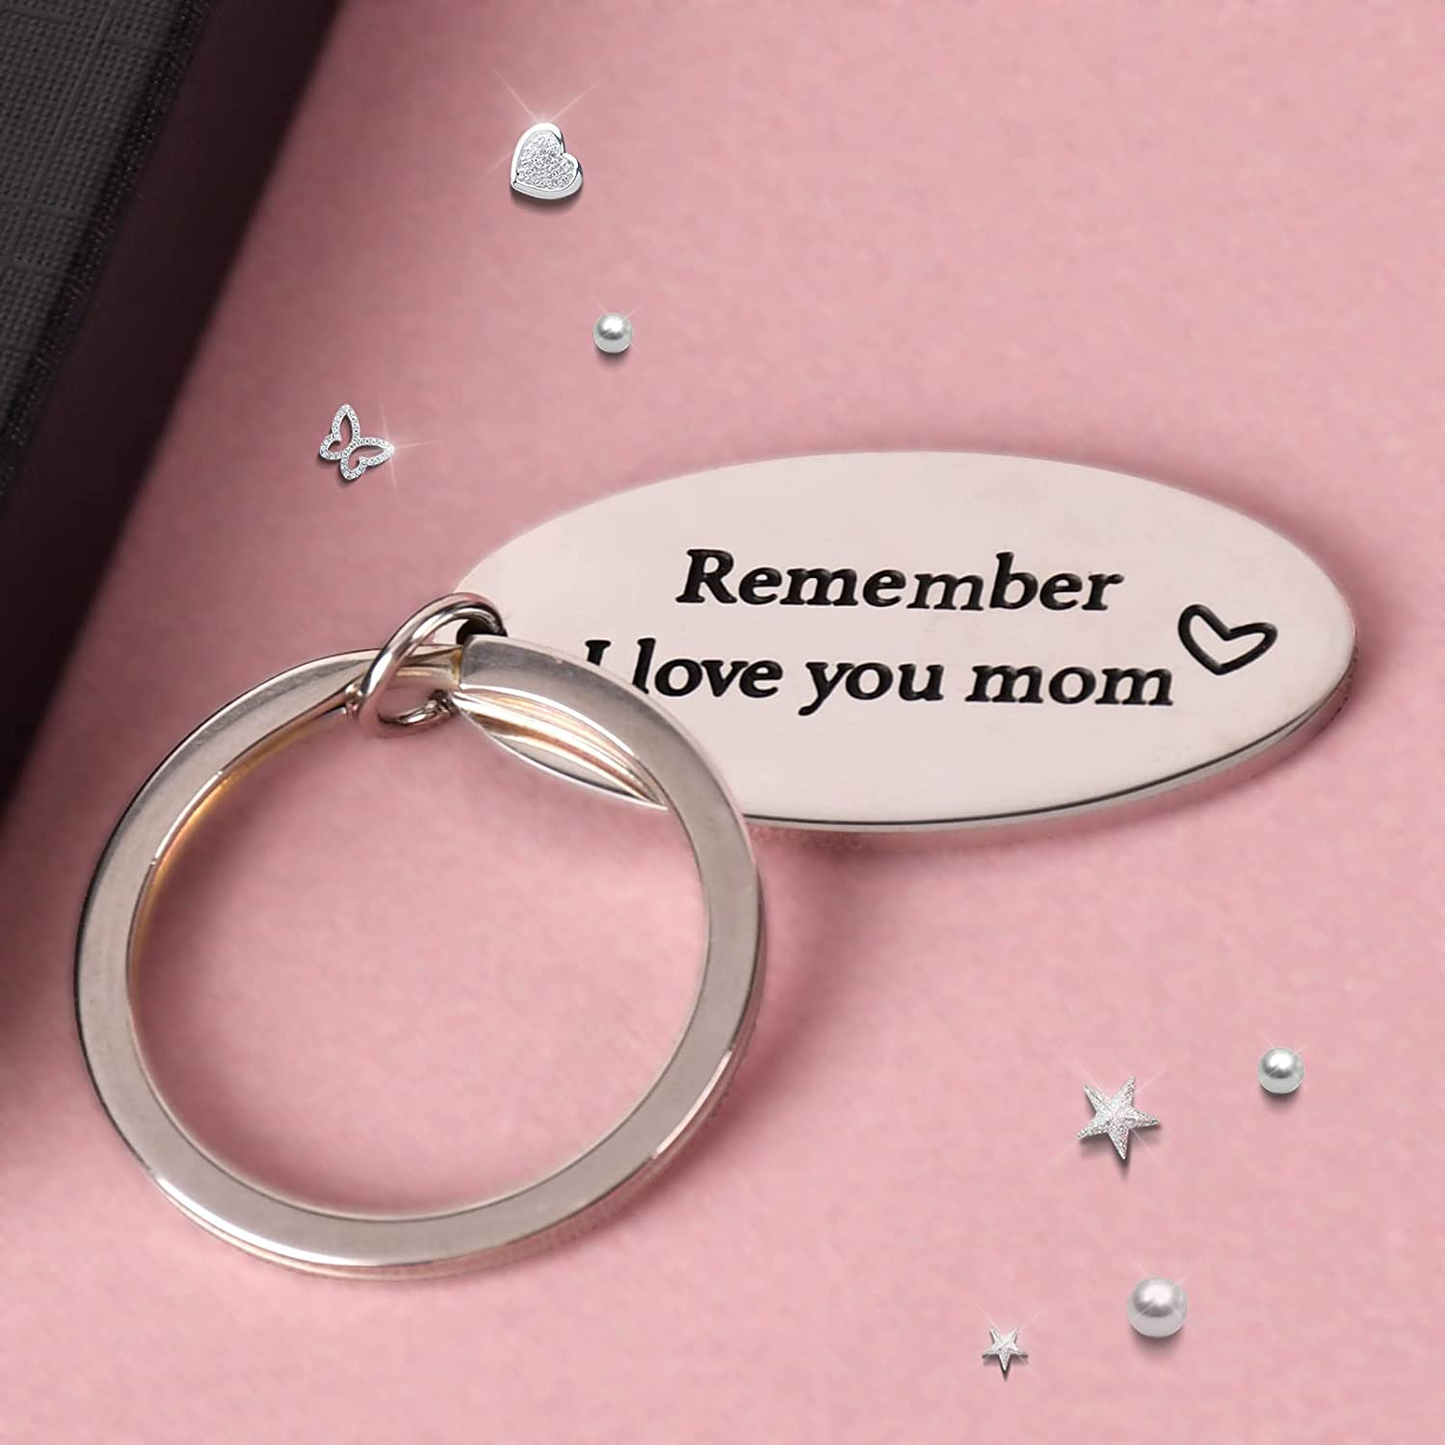 Mothers Day Gifts for Mom,Mom Gifts for Women Keychain,Gifts for Mom from Daughter Son Present Jewelry,Gifts for Best Mom